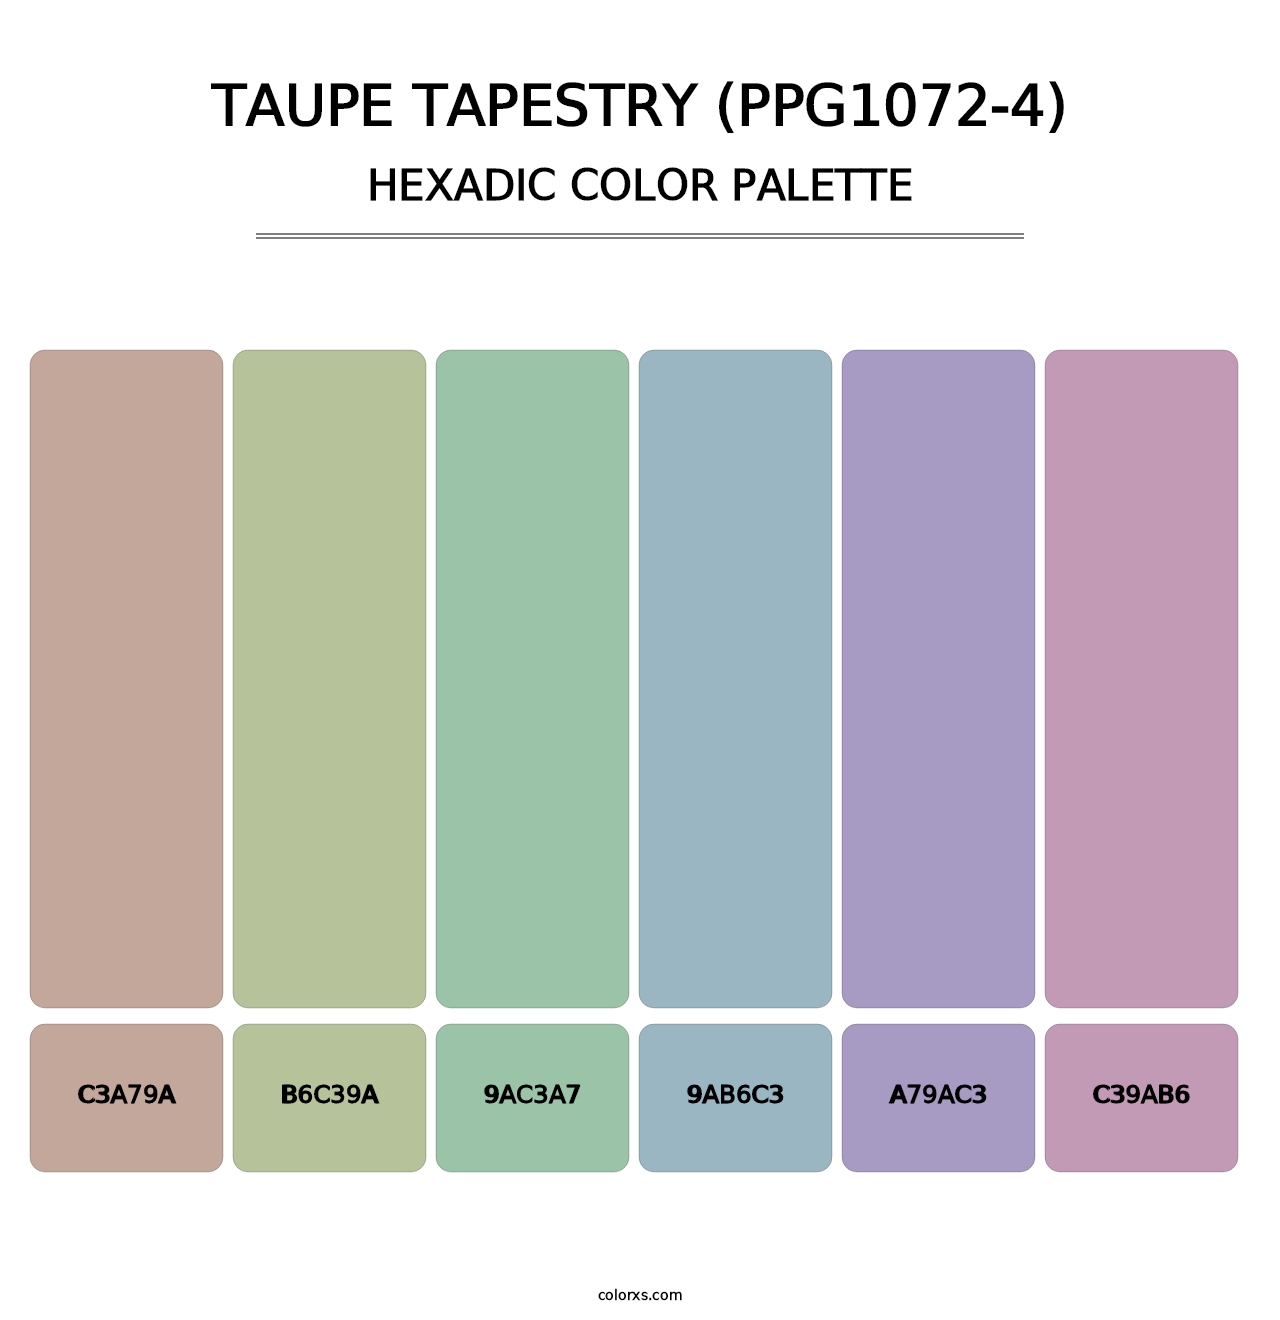 Taupe Tapestry (PPG1072-4) - Hexadic Color Palette